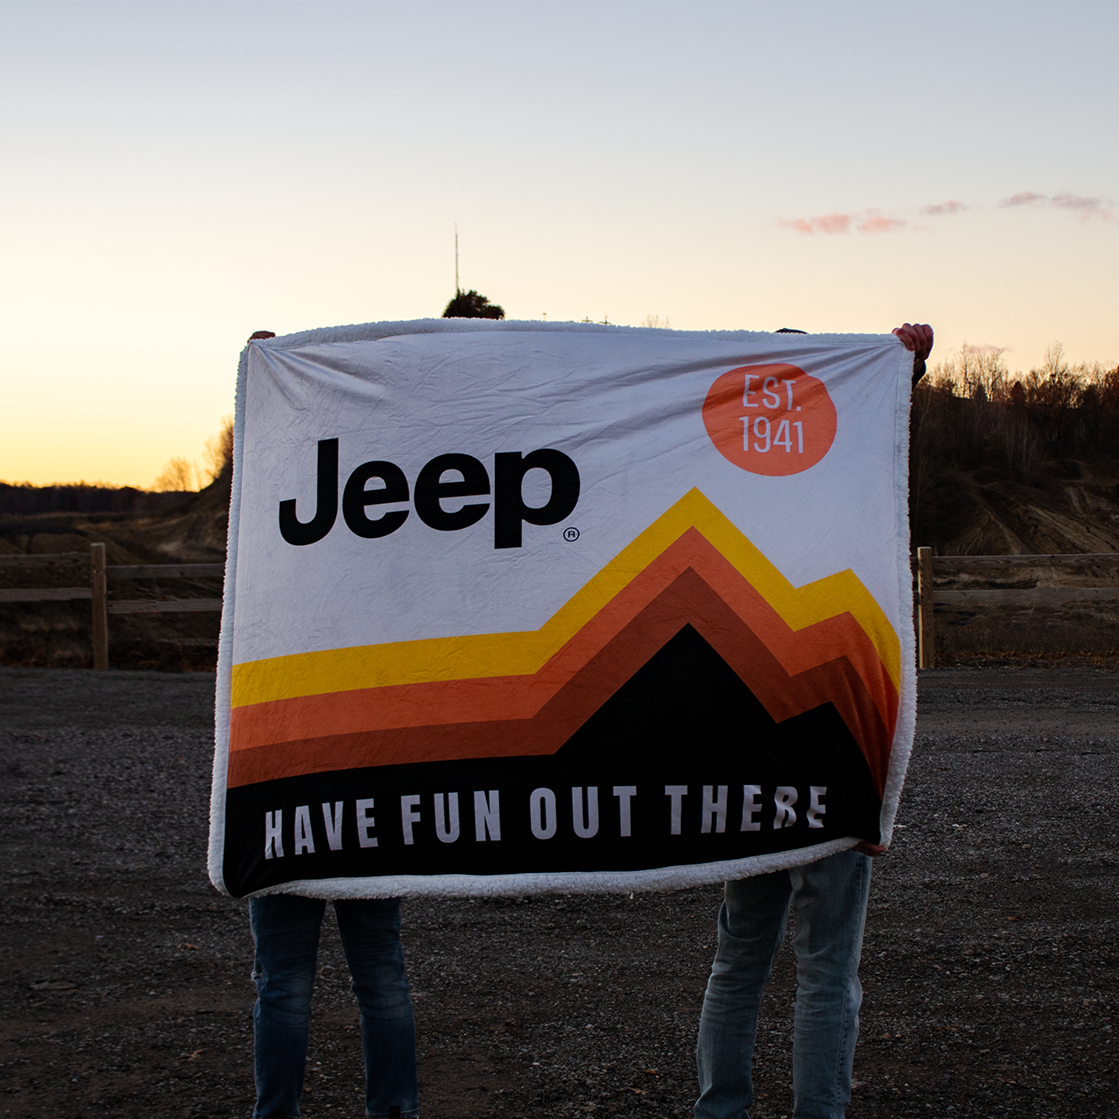 Blanket - Jeep® Have Fun Out There